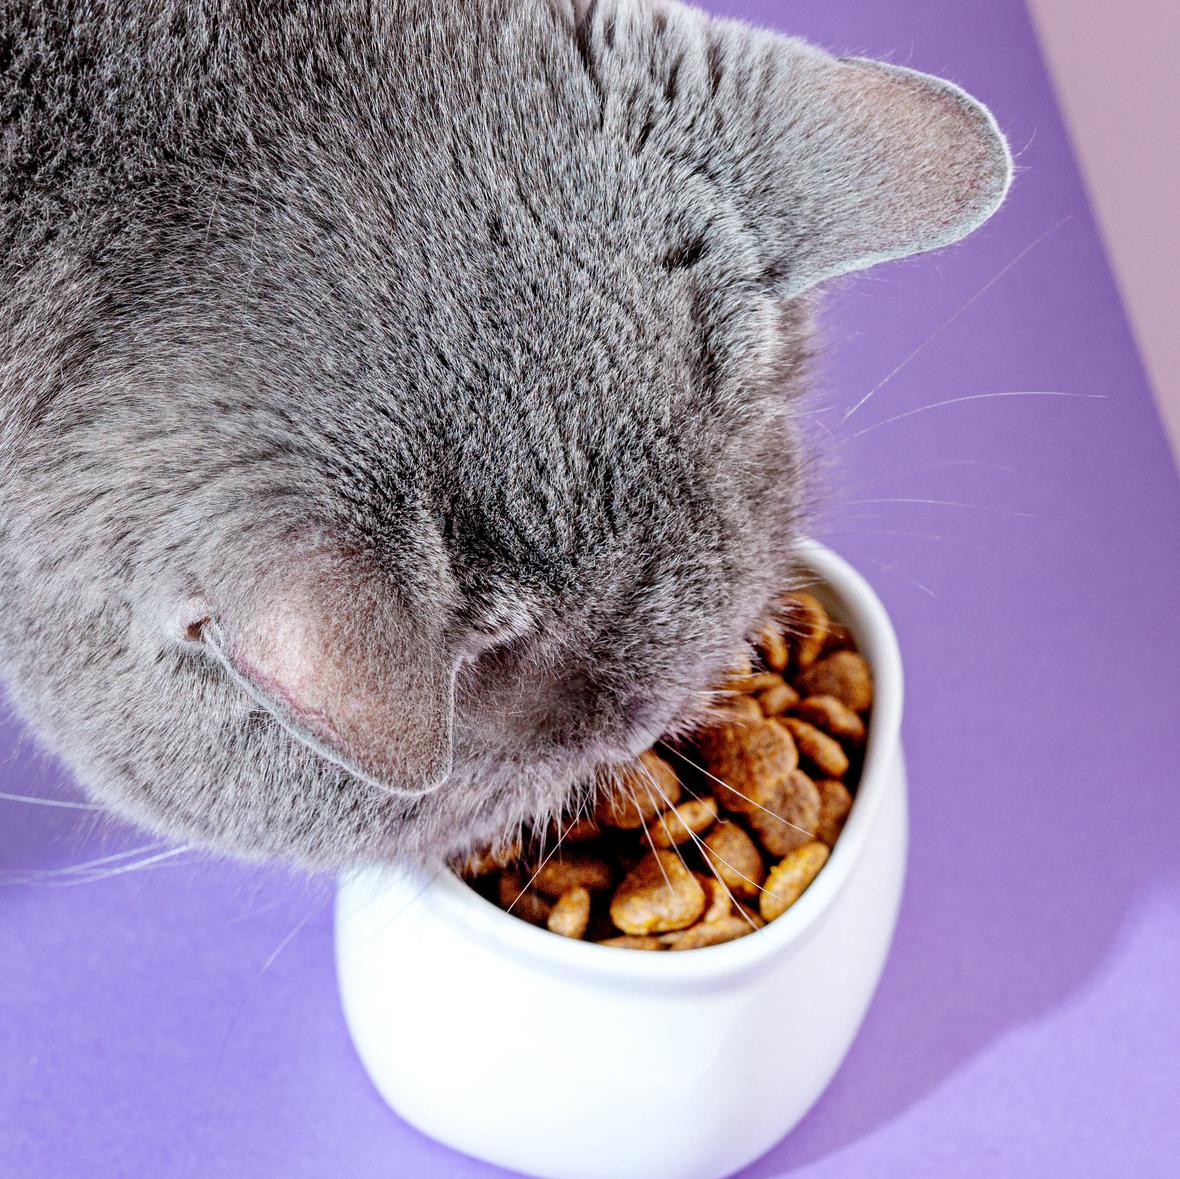 The cat eats dry food from a white bowl. On a purple background. 